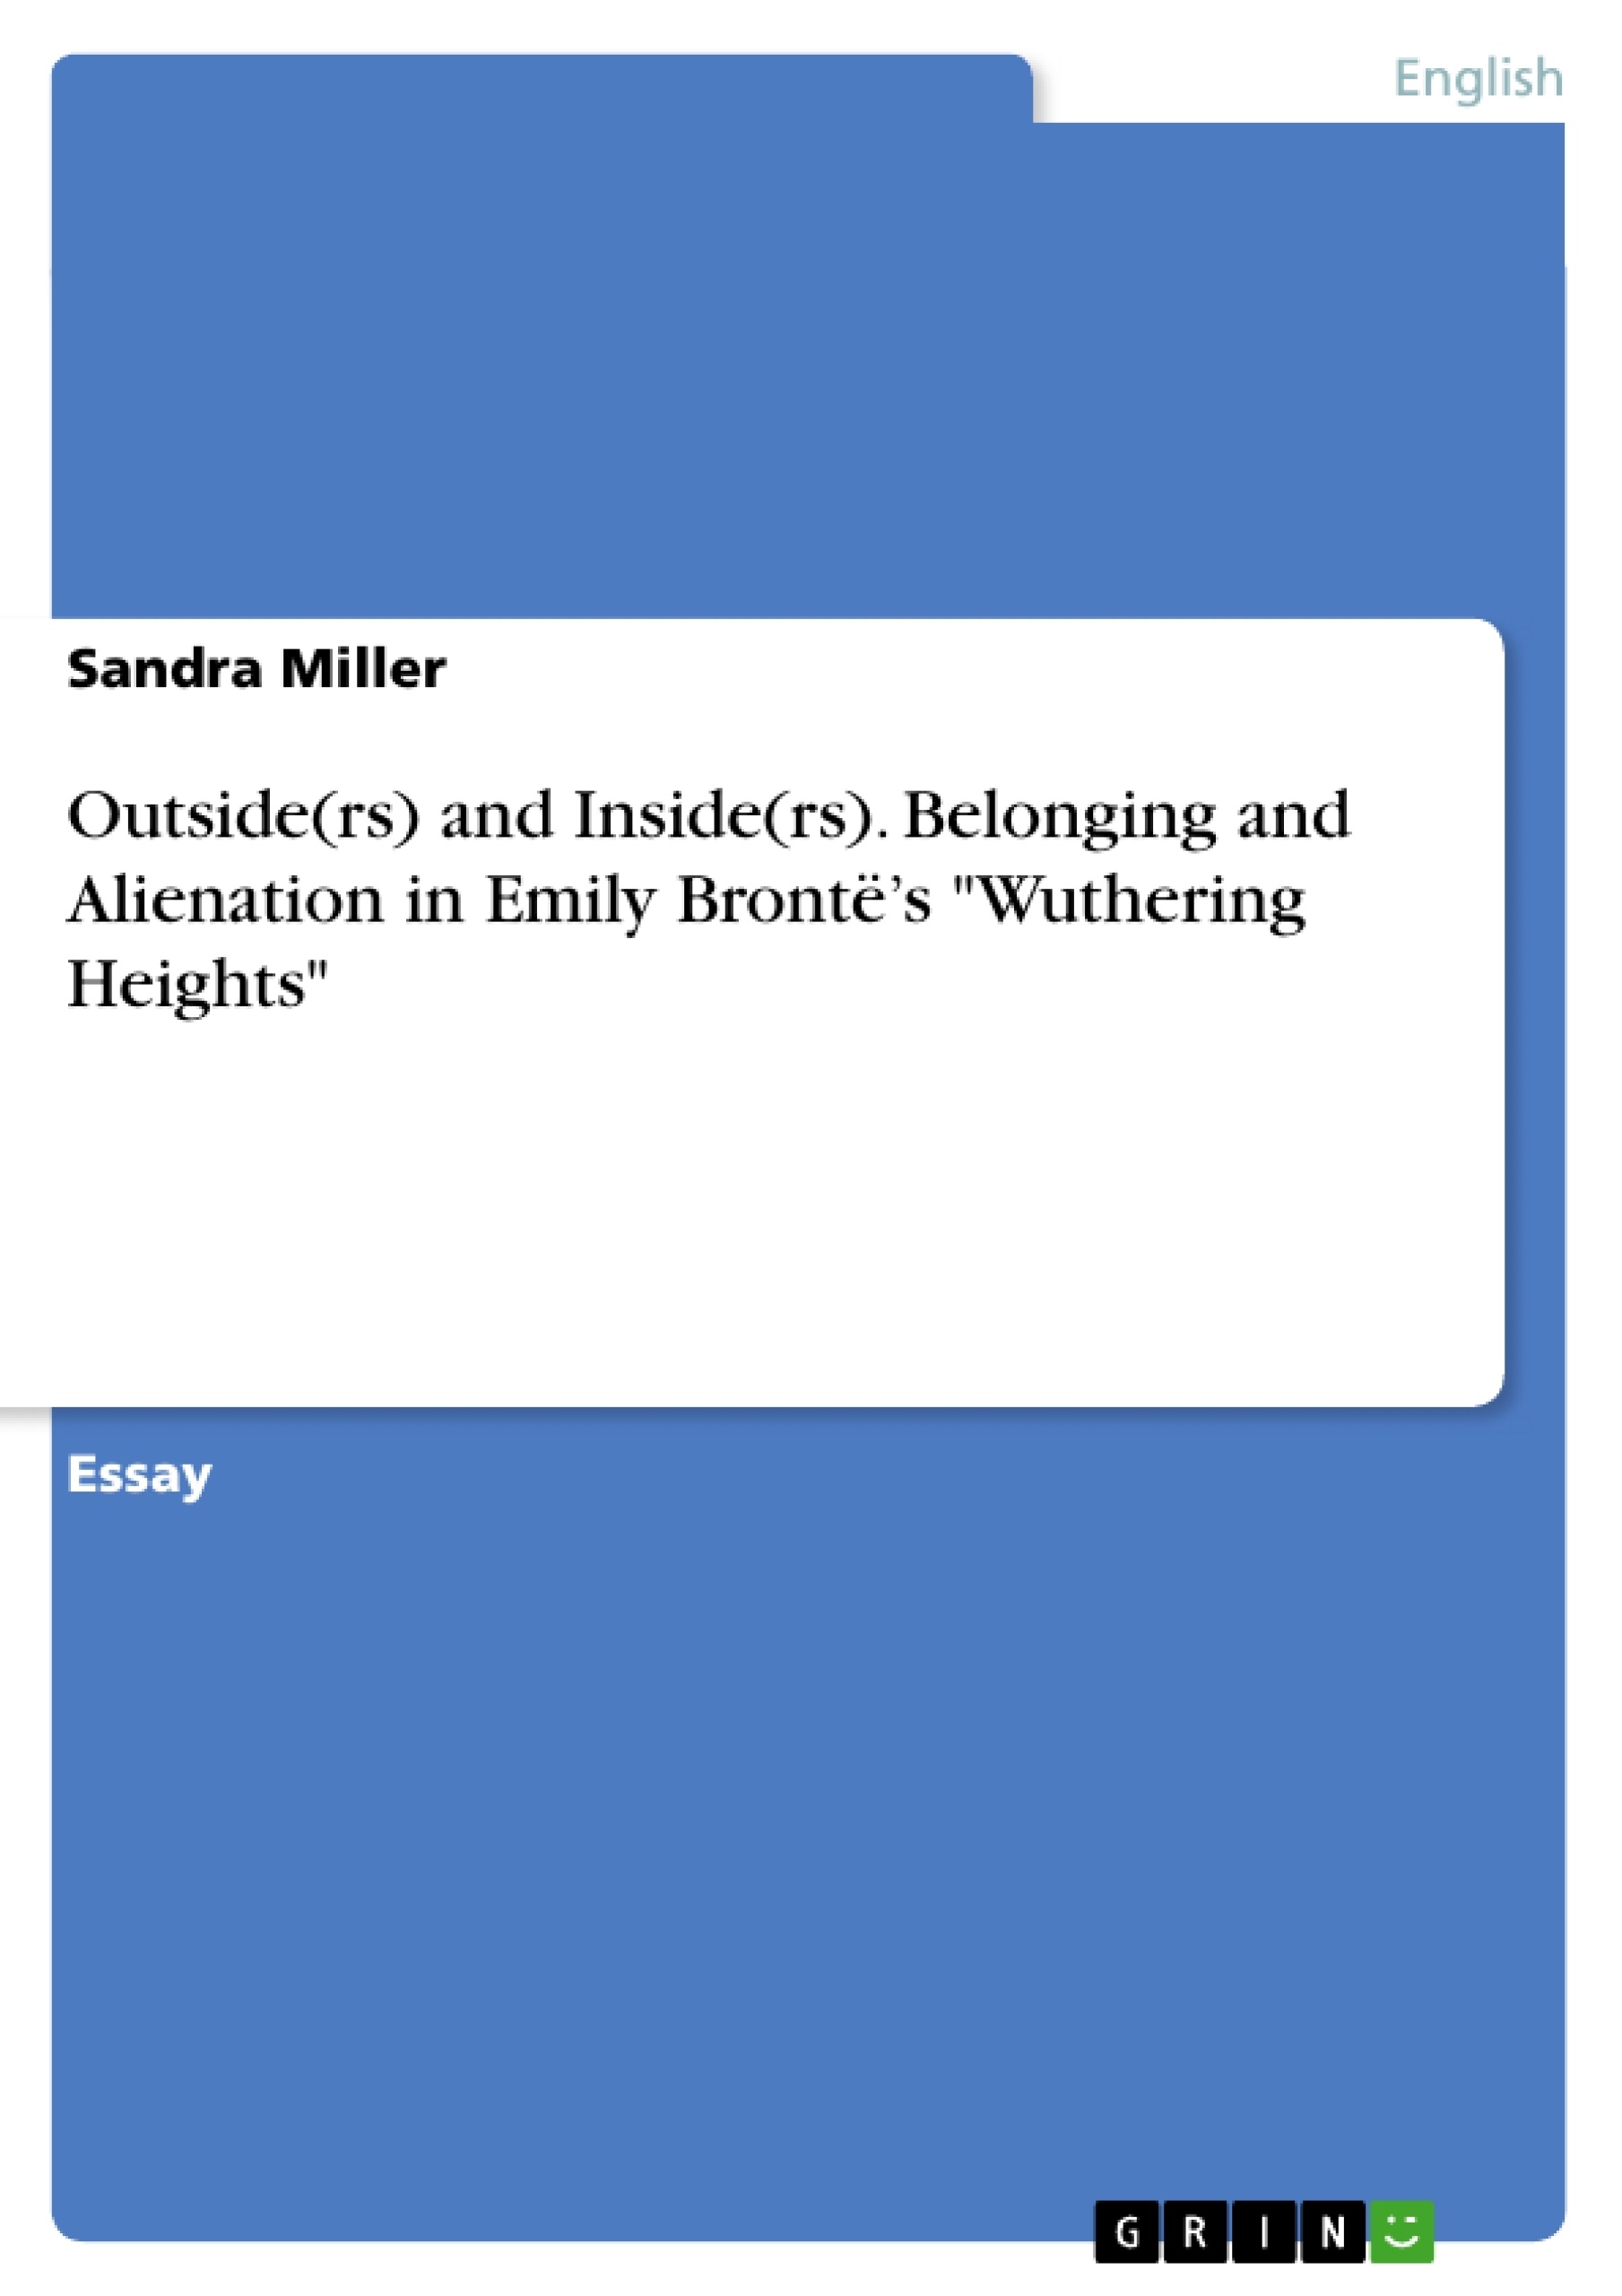 Titre: Outside(rs) and Inside(rs). Belonging and Alienation in Emily Brontë’s "Wuthering Heights"